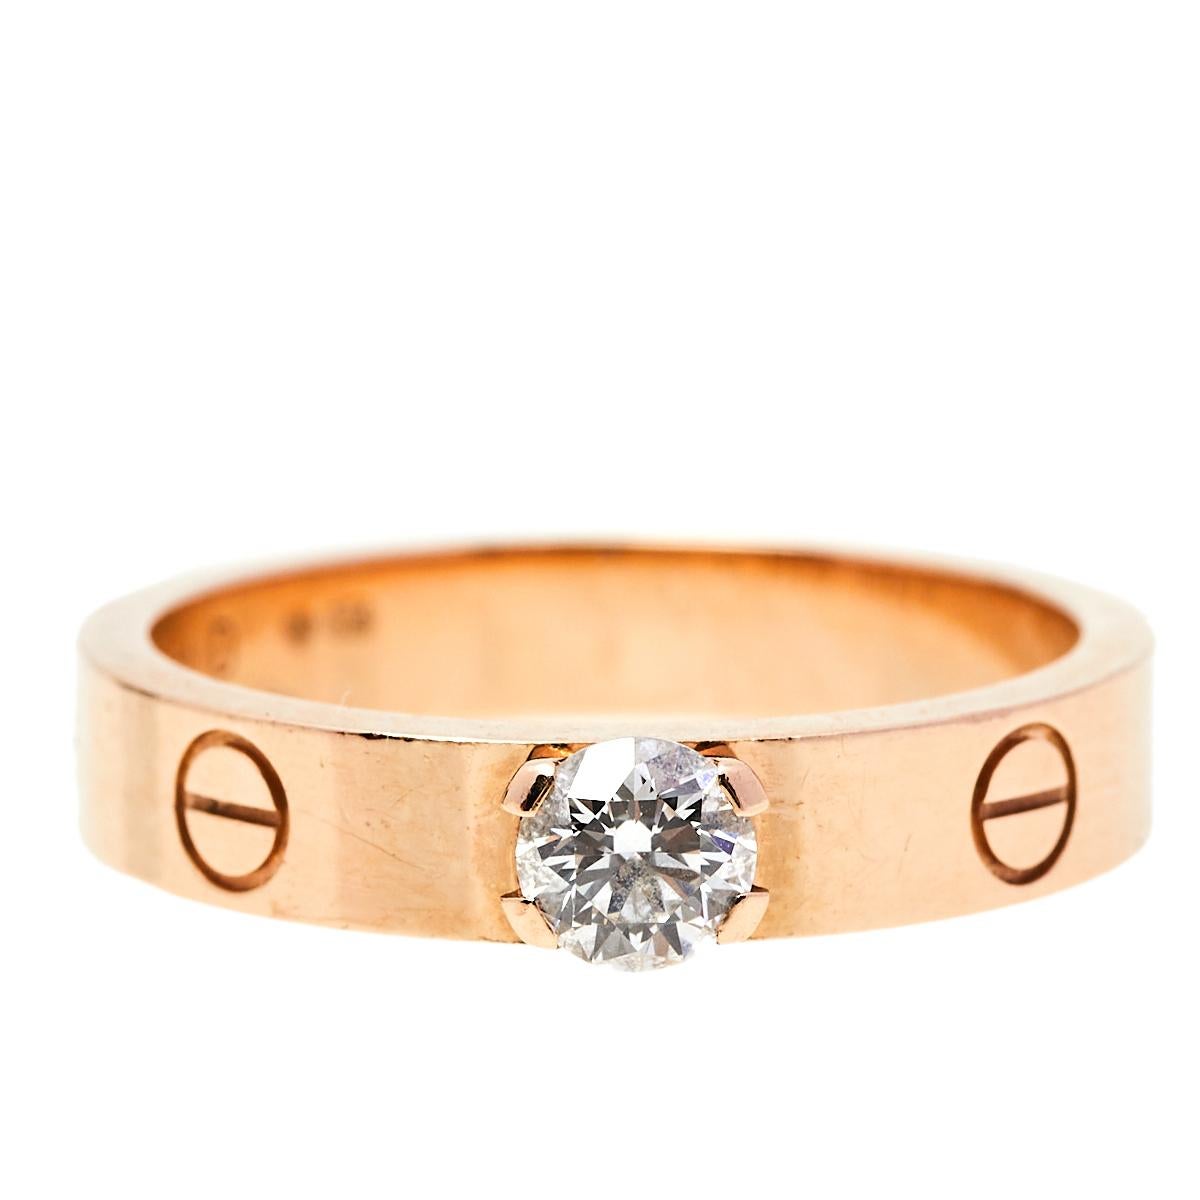 One of the most iconic and loved designs from the house of Cartier, this stunning Love ring is an icon of style and luxury. Constructed in 18K rose gold, this ring features the signature screw details all around the surface as symbols of a sealed